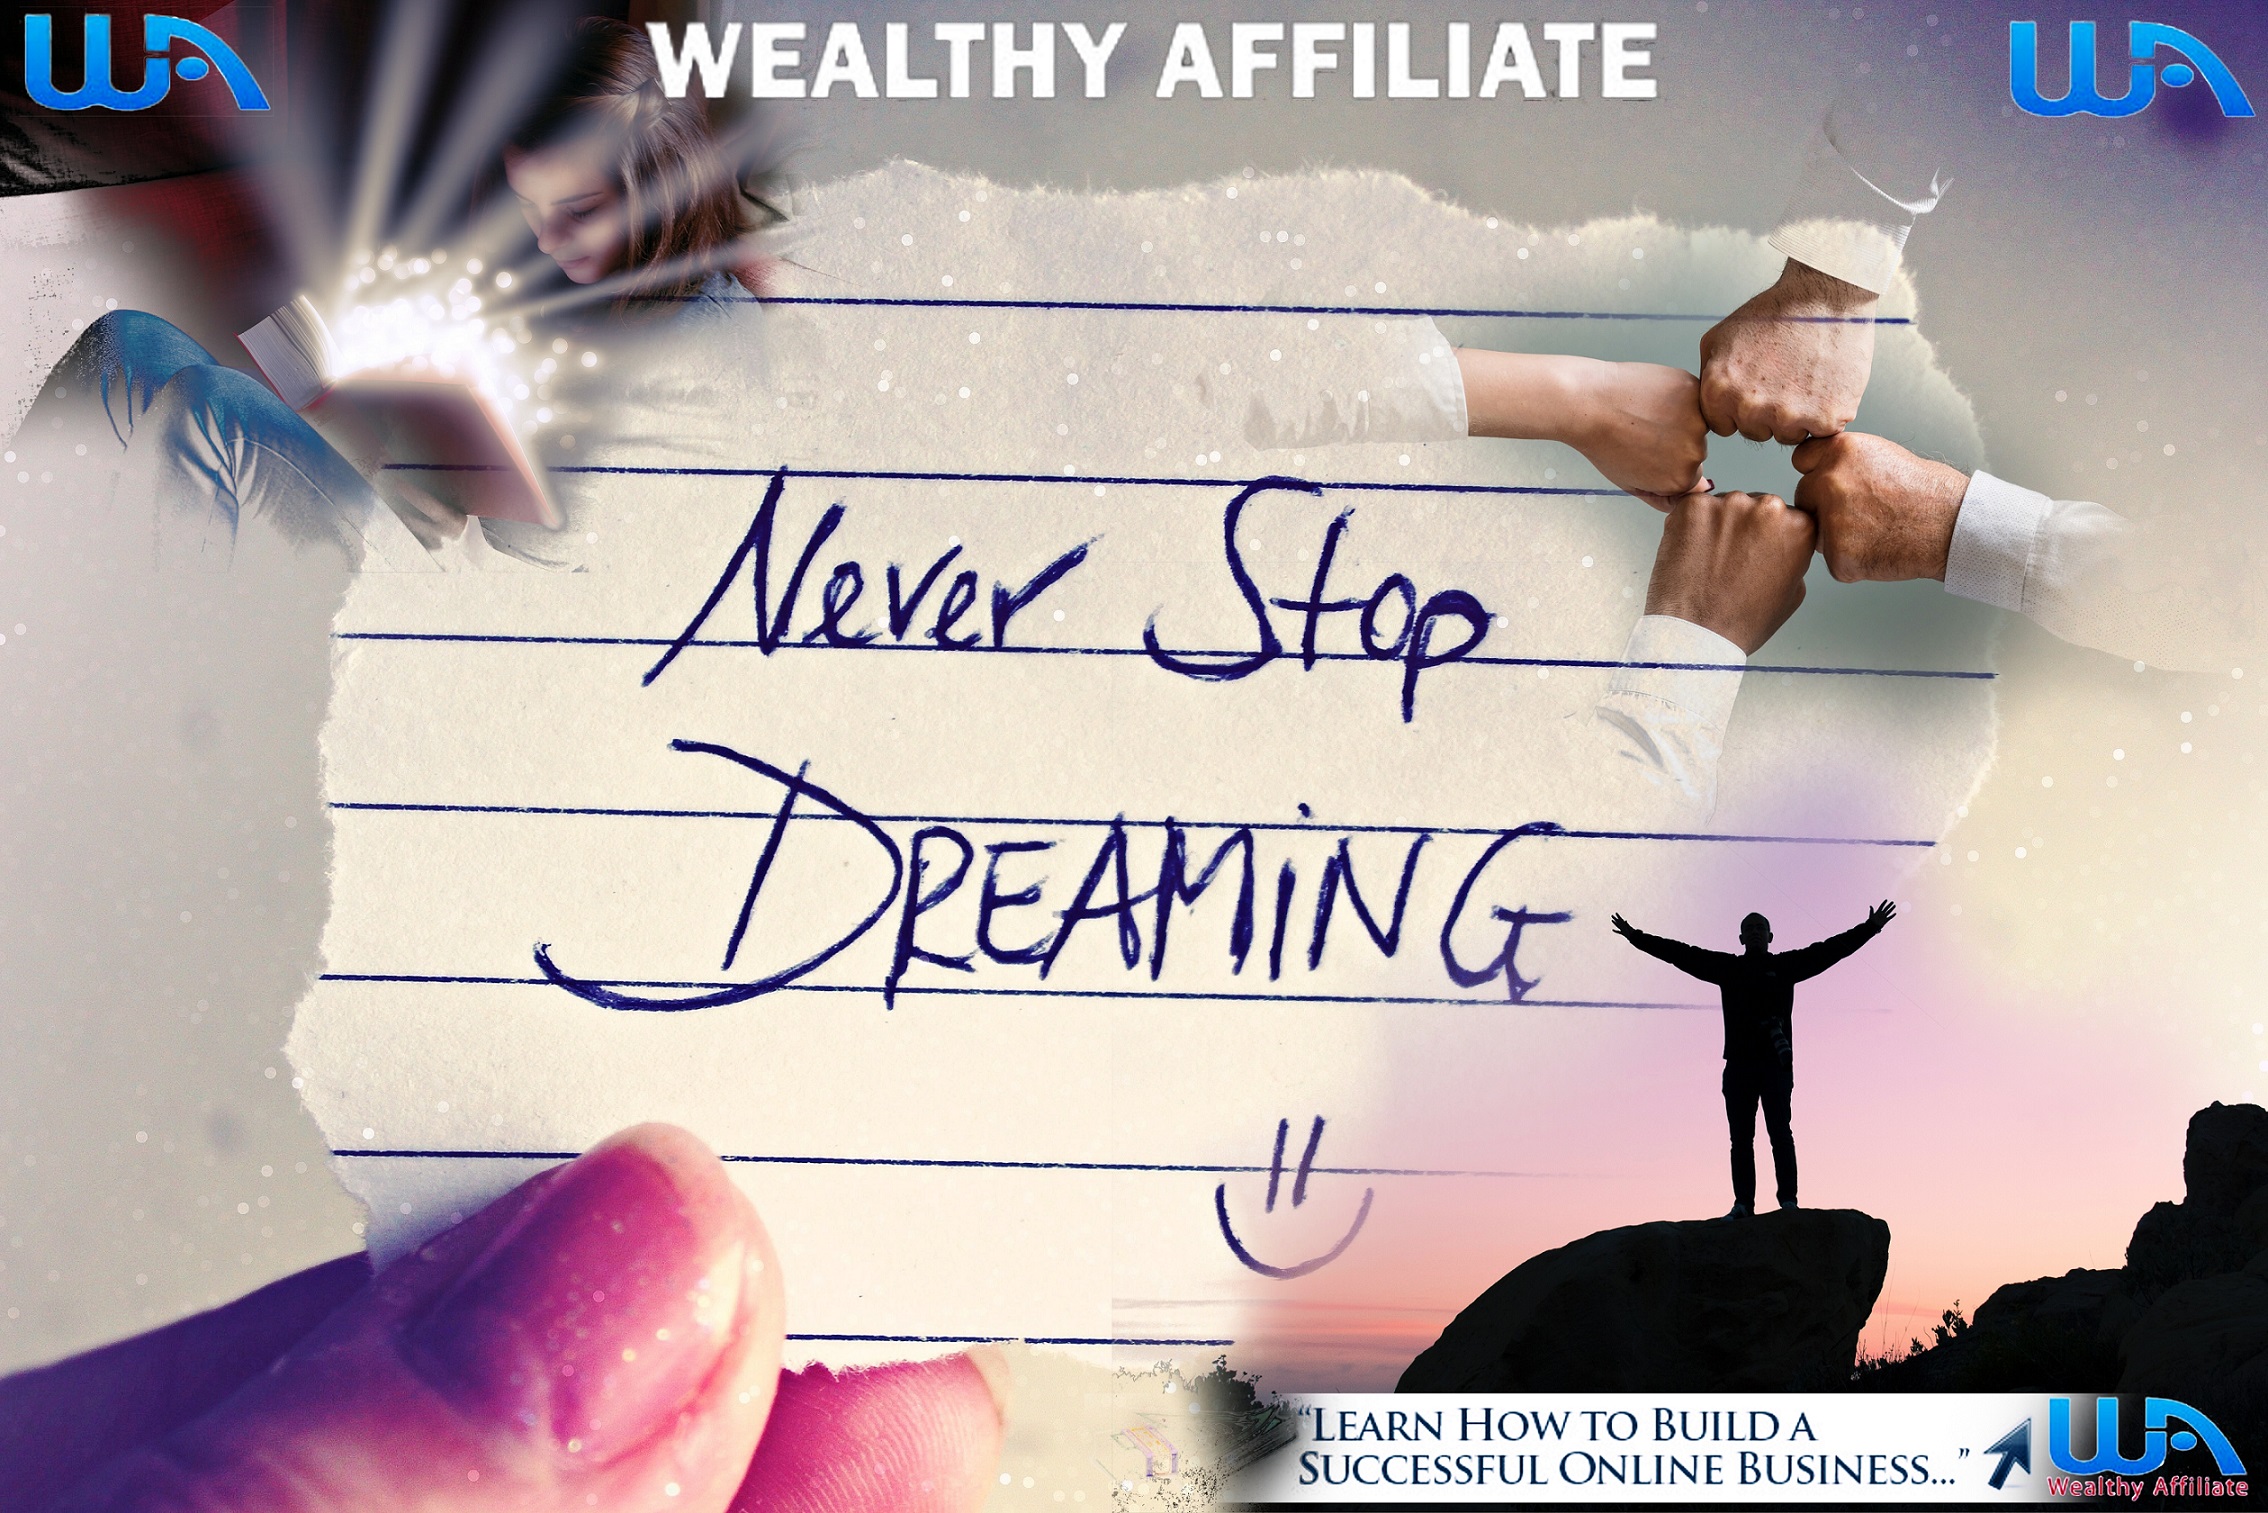 Read the honest Wealthy Affiliate review and decide you way.